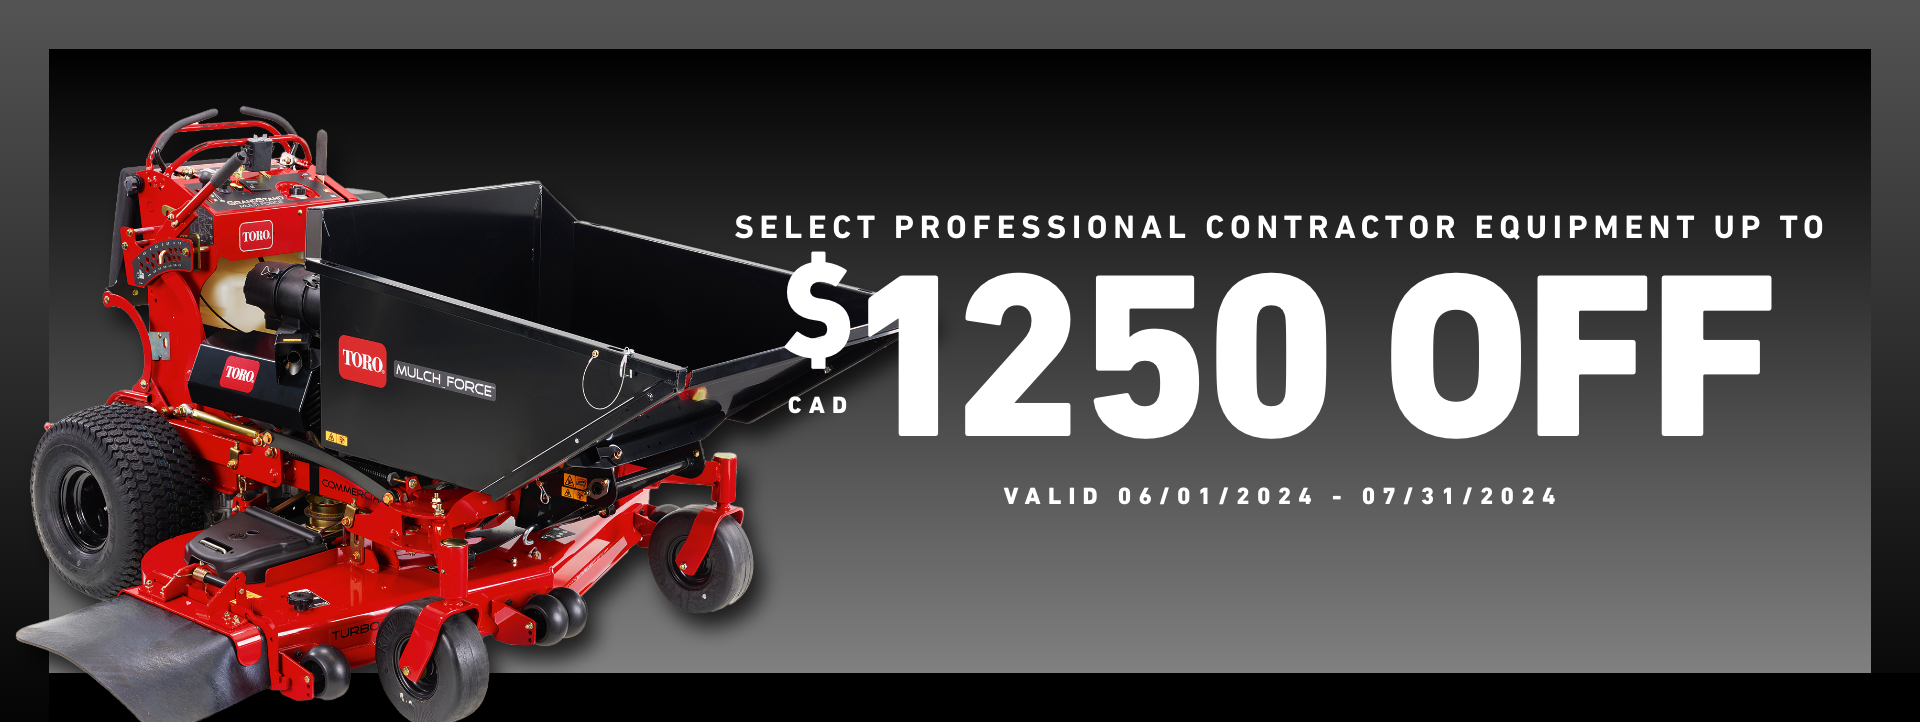 Select Professional Contractor Equipment Up To $1250 off - Valid June 1, 2024 to July 31, 2024